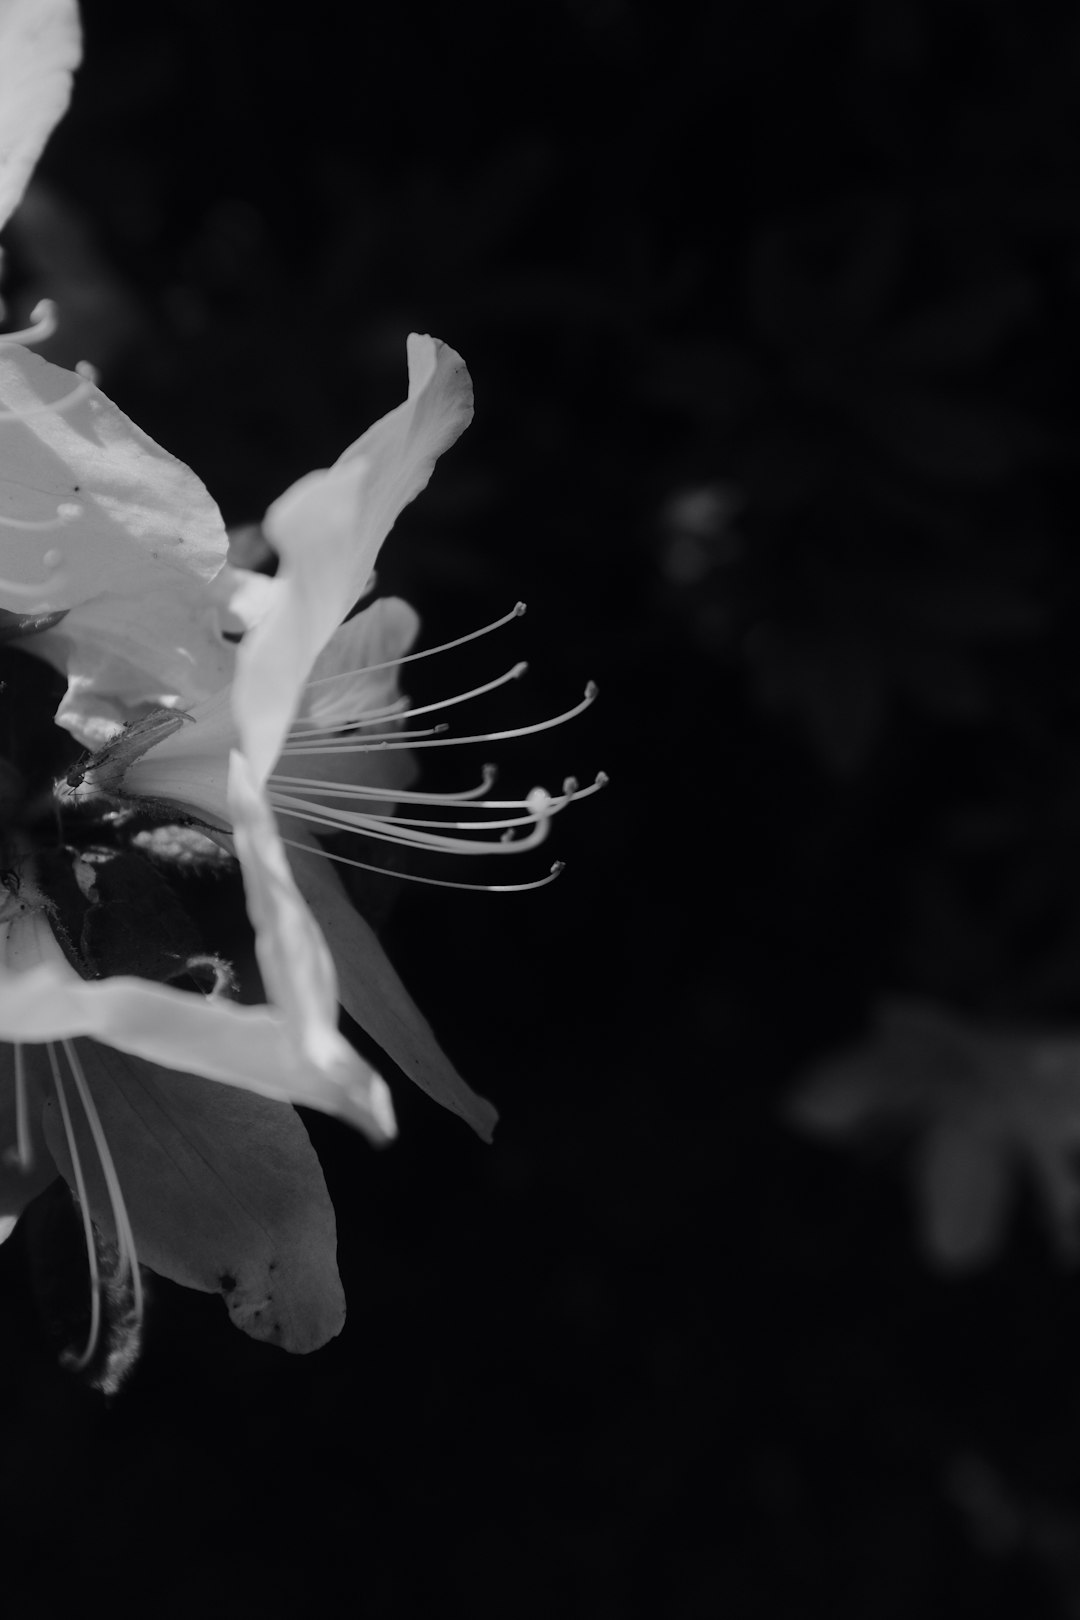 white flower in grayscale photography